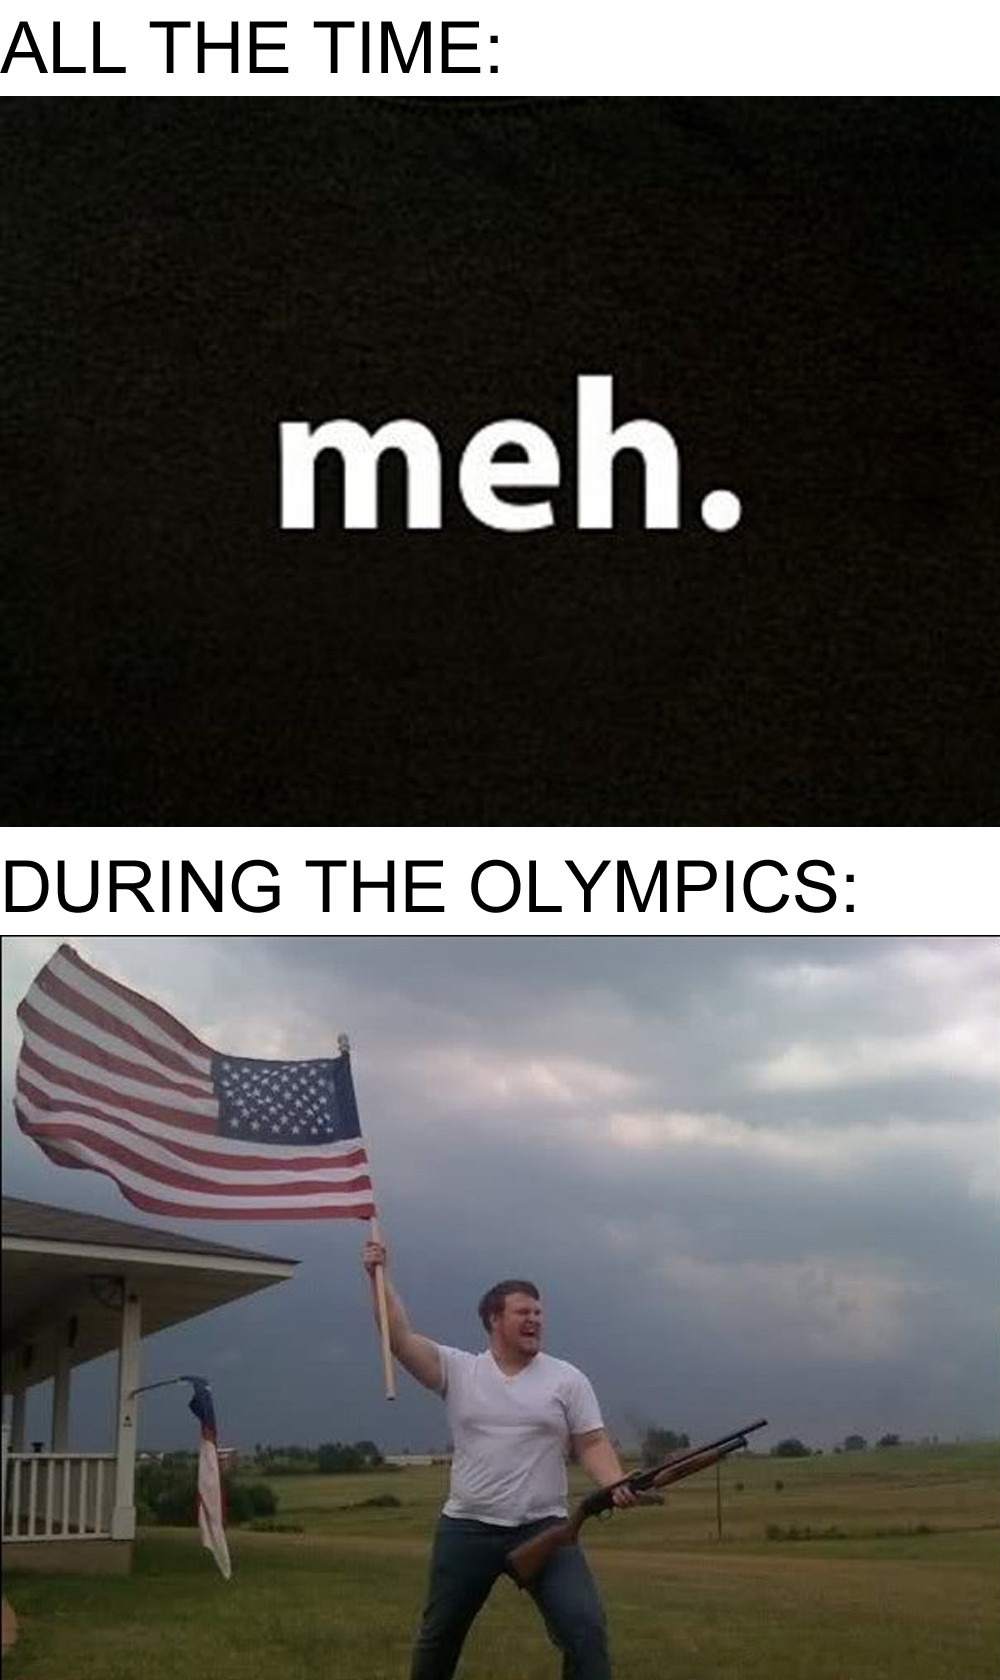 most american - All The Time meh. During The Olympics